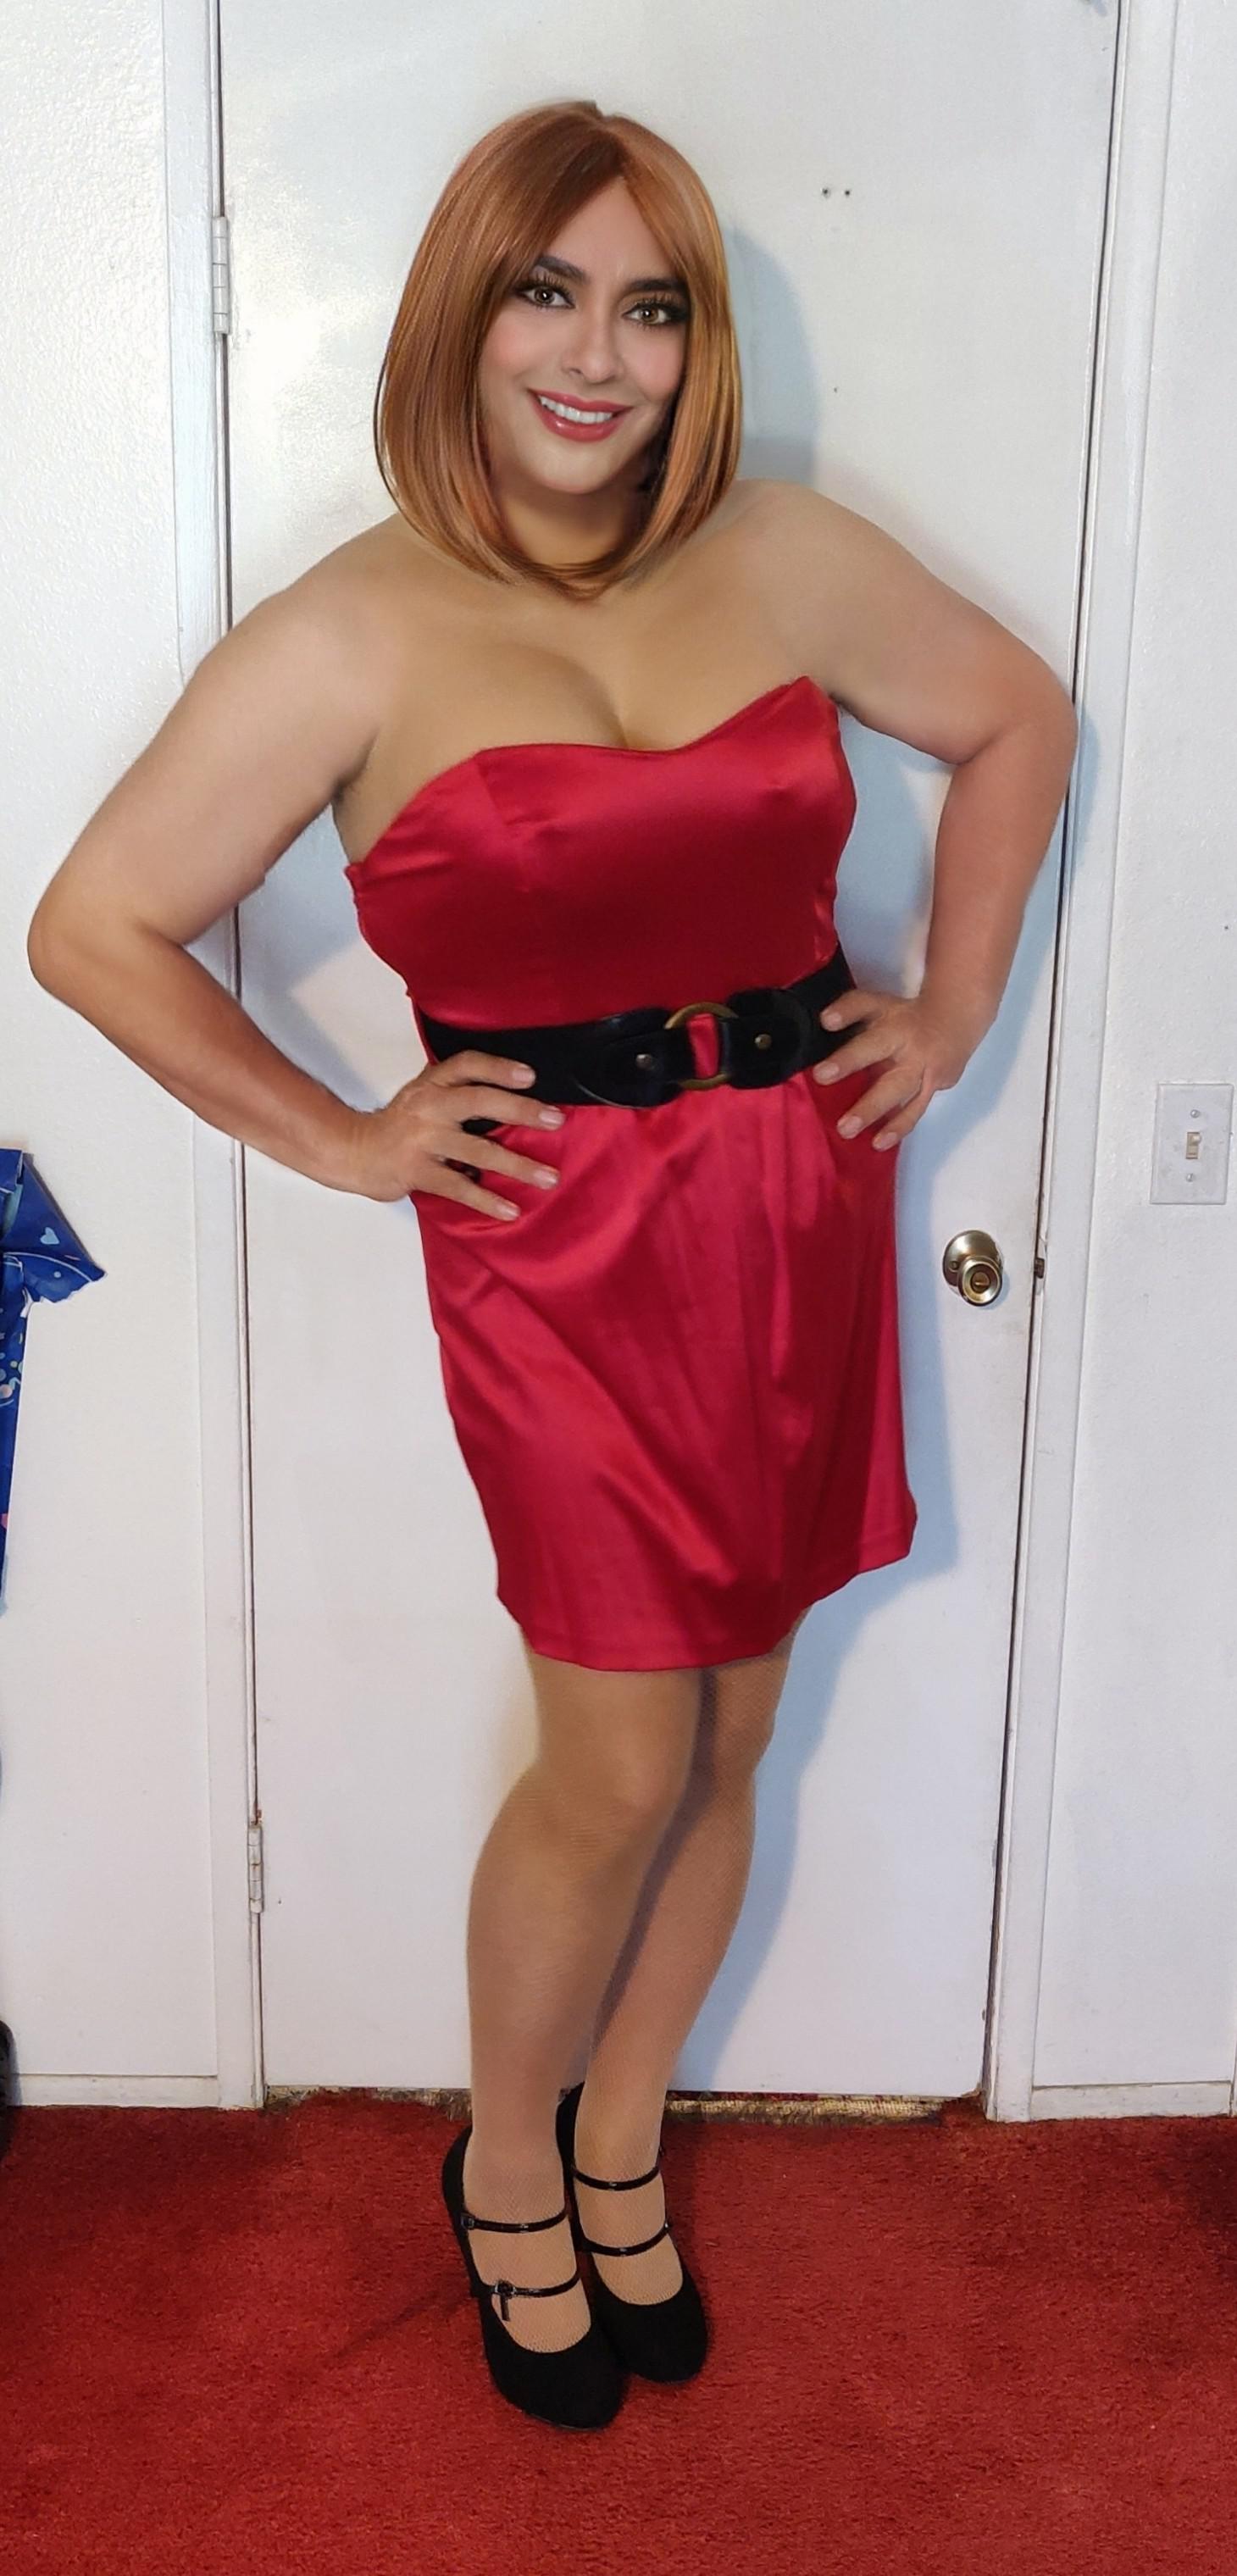 Looking for crossdressers who 44009